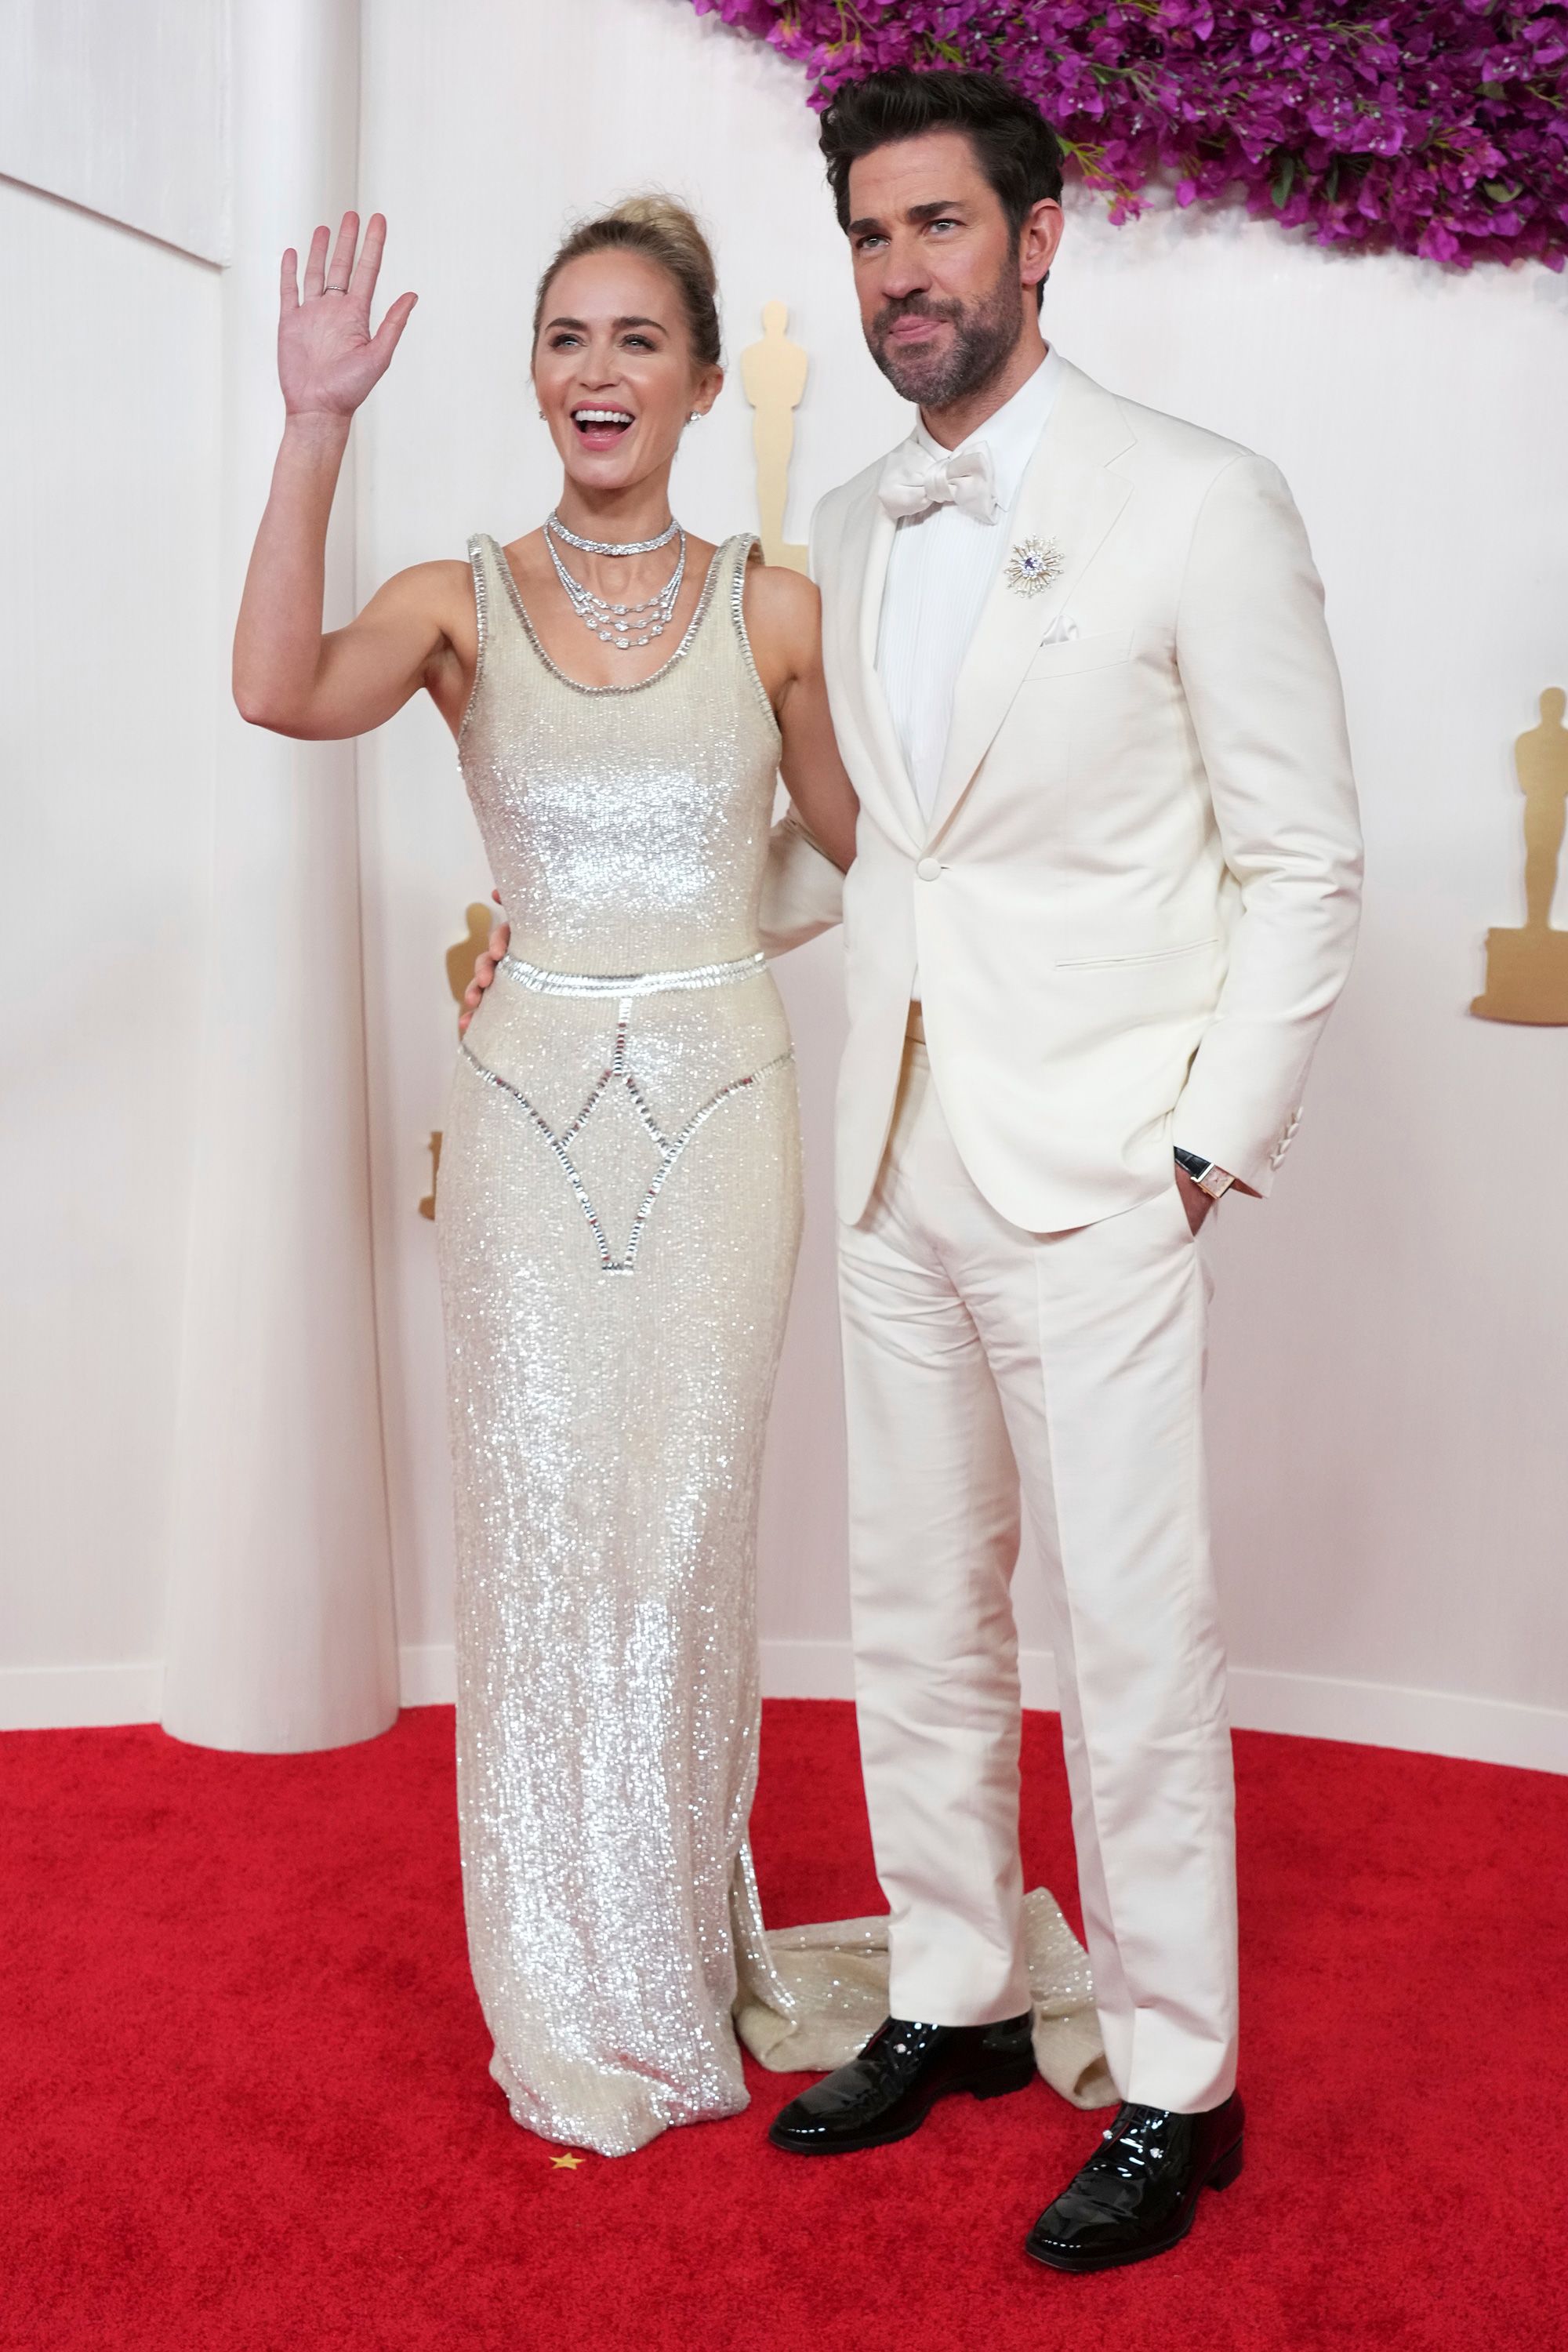 Emily Blunt wore a head-turning Schiaparelli gown with floating straps. She was pictured alongside husband John Krasinski in an off-white tuxedo.